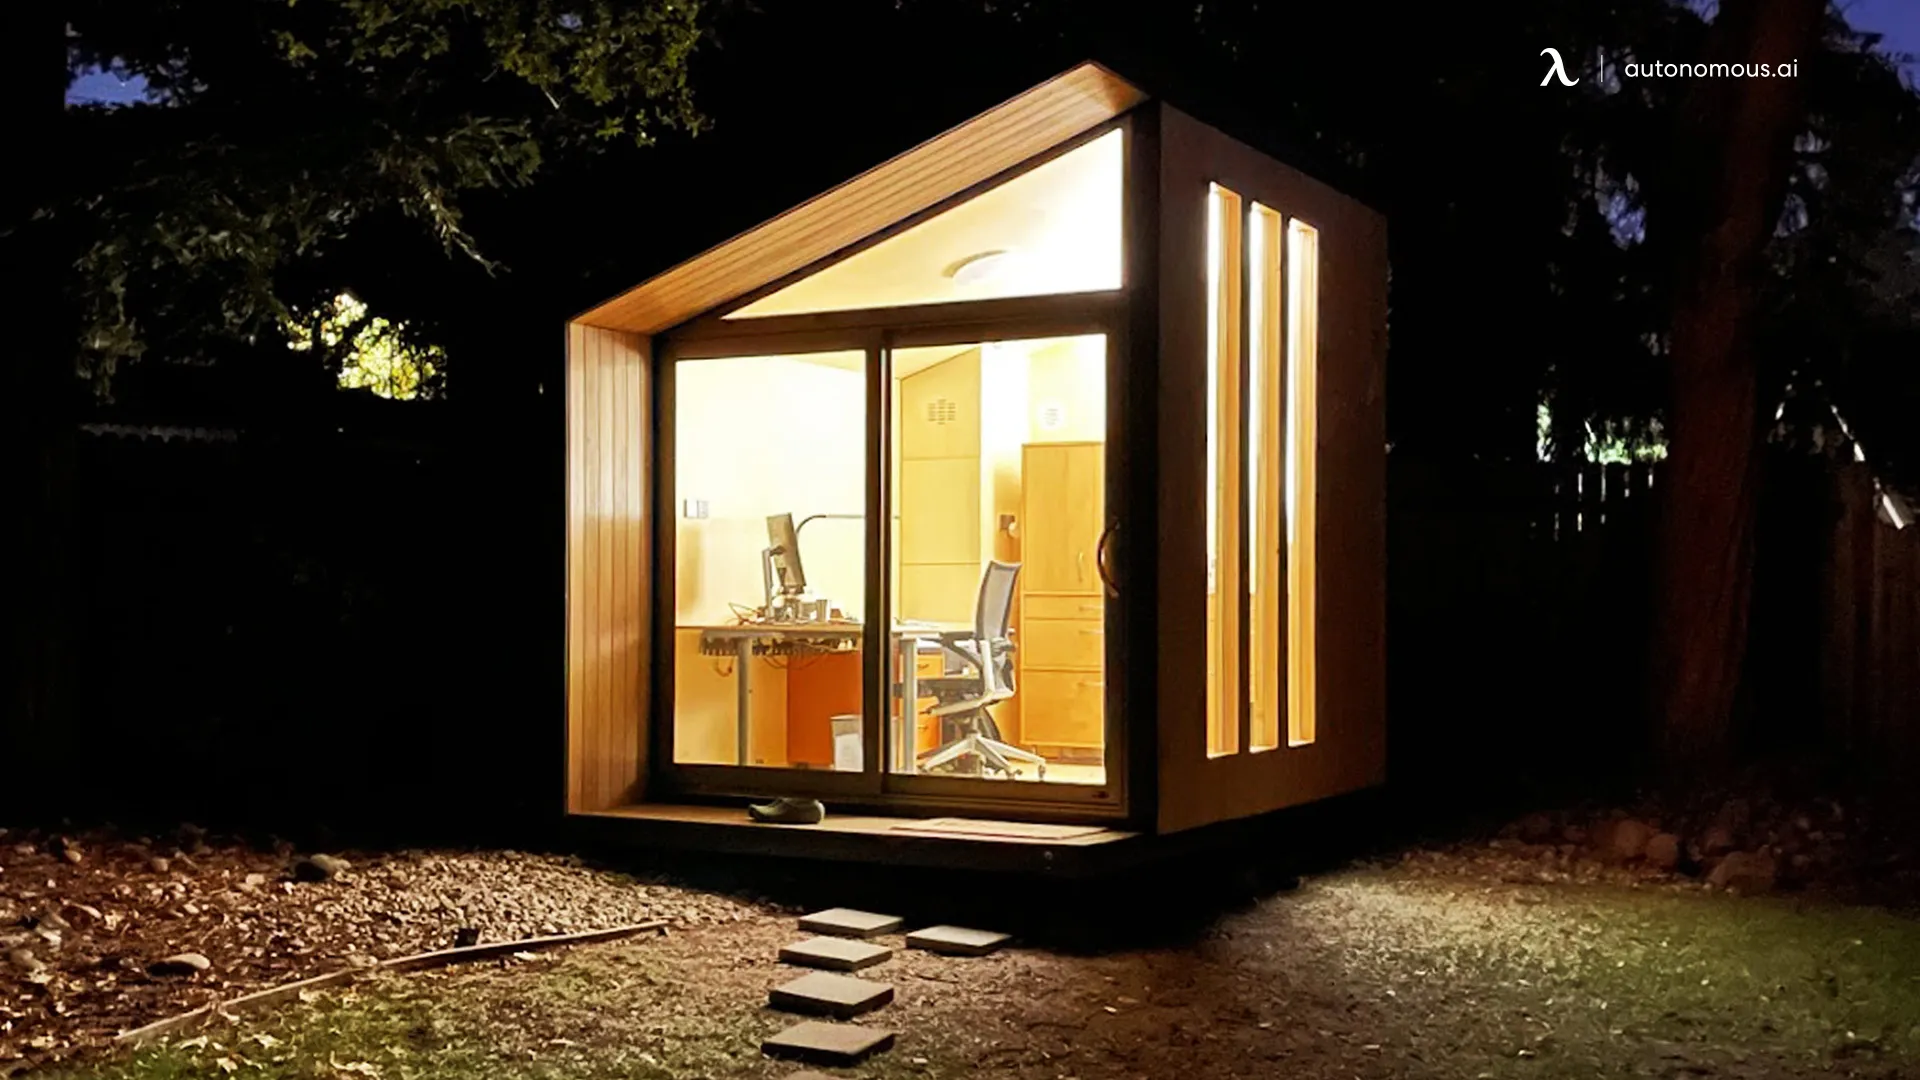 What Are the Benefits of a Prefab Cabin?